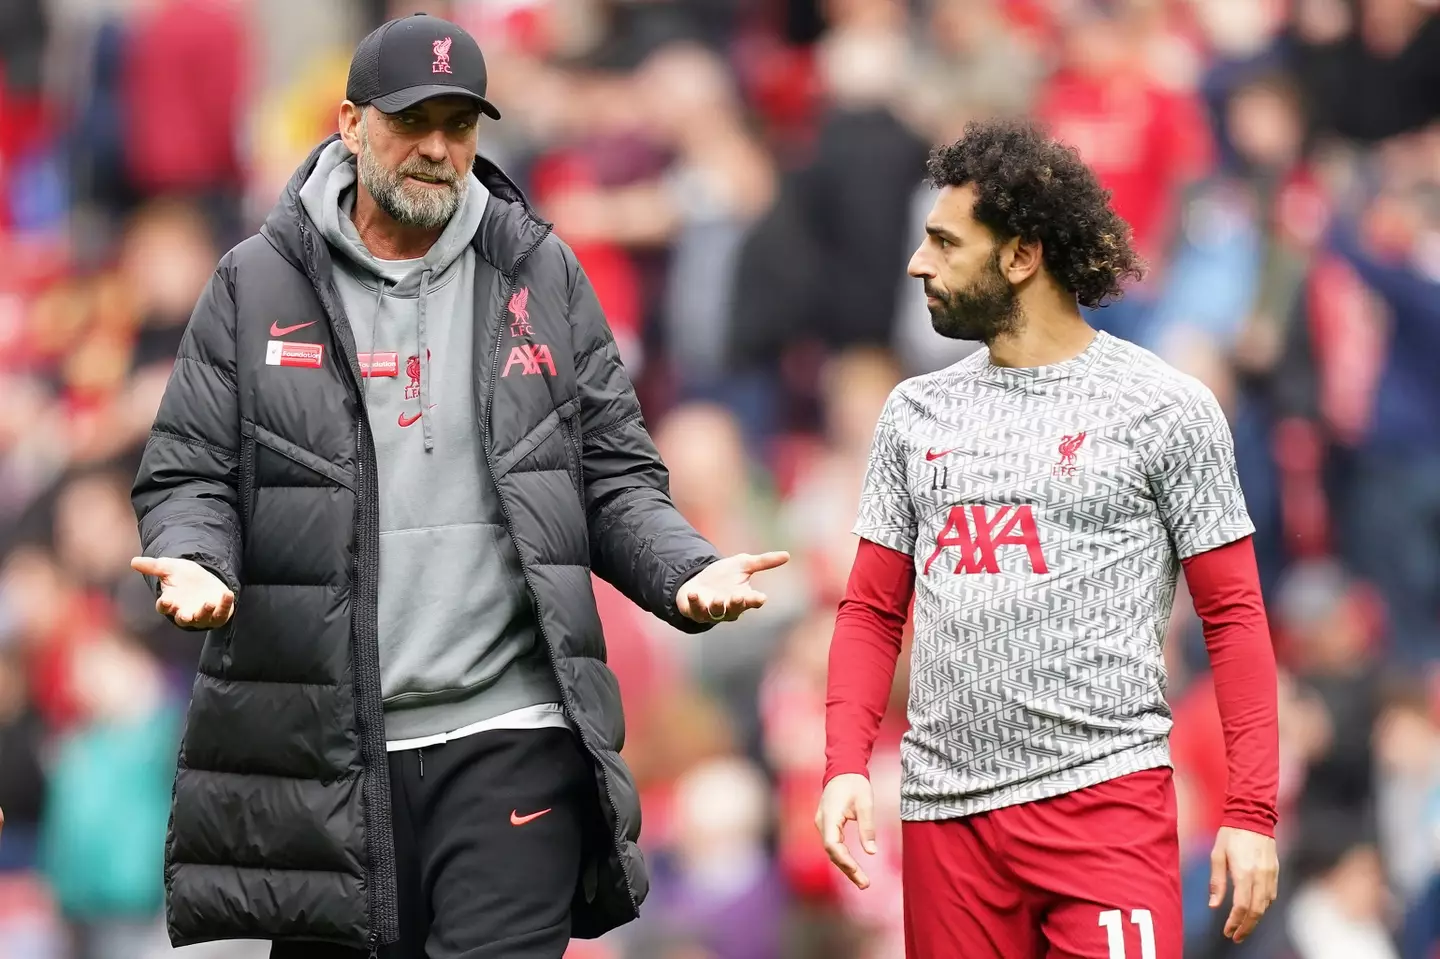 Jurgen Klopp and Mohamed Salah were understandably disappointed after failing to finish in the top four. (